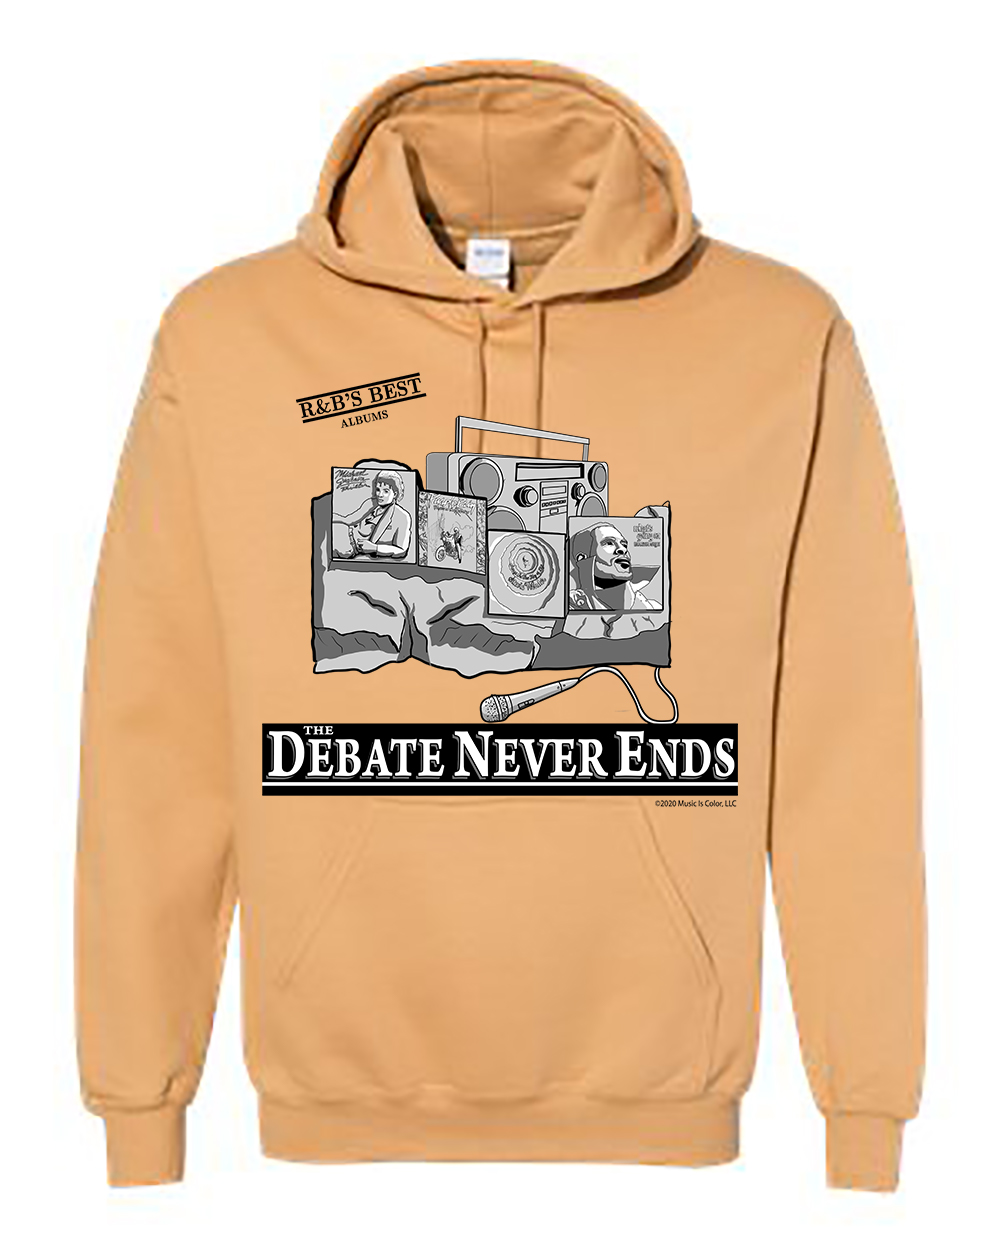 Mount Rushmore - R&B’s Best Albums (Gold Heavy Duty Hoodie)